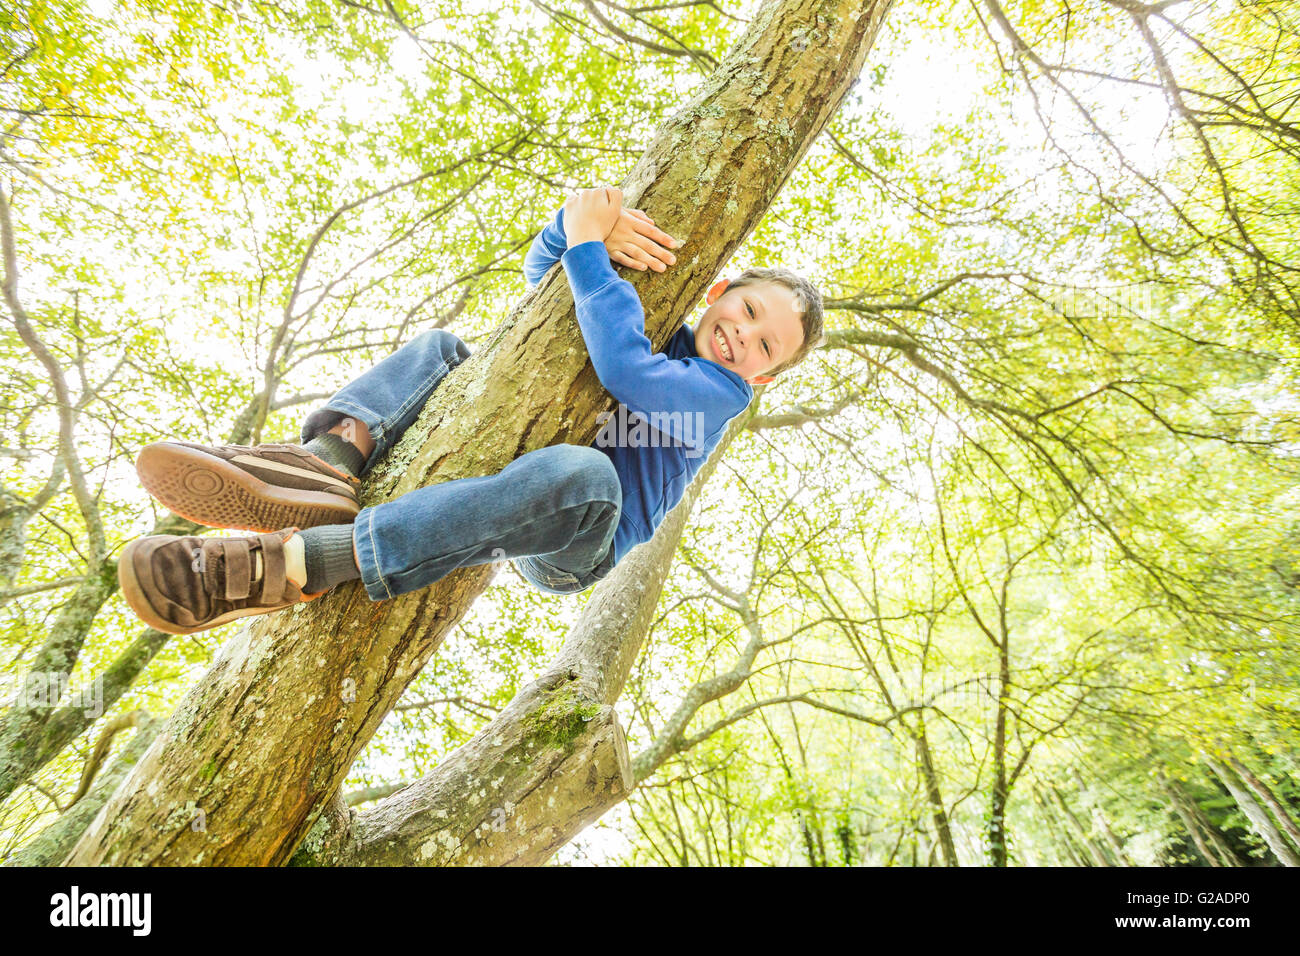 Smiling boy (6-7) climbing tree Banque D'Images